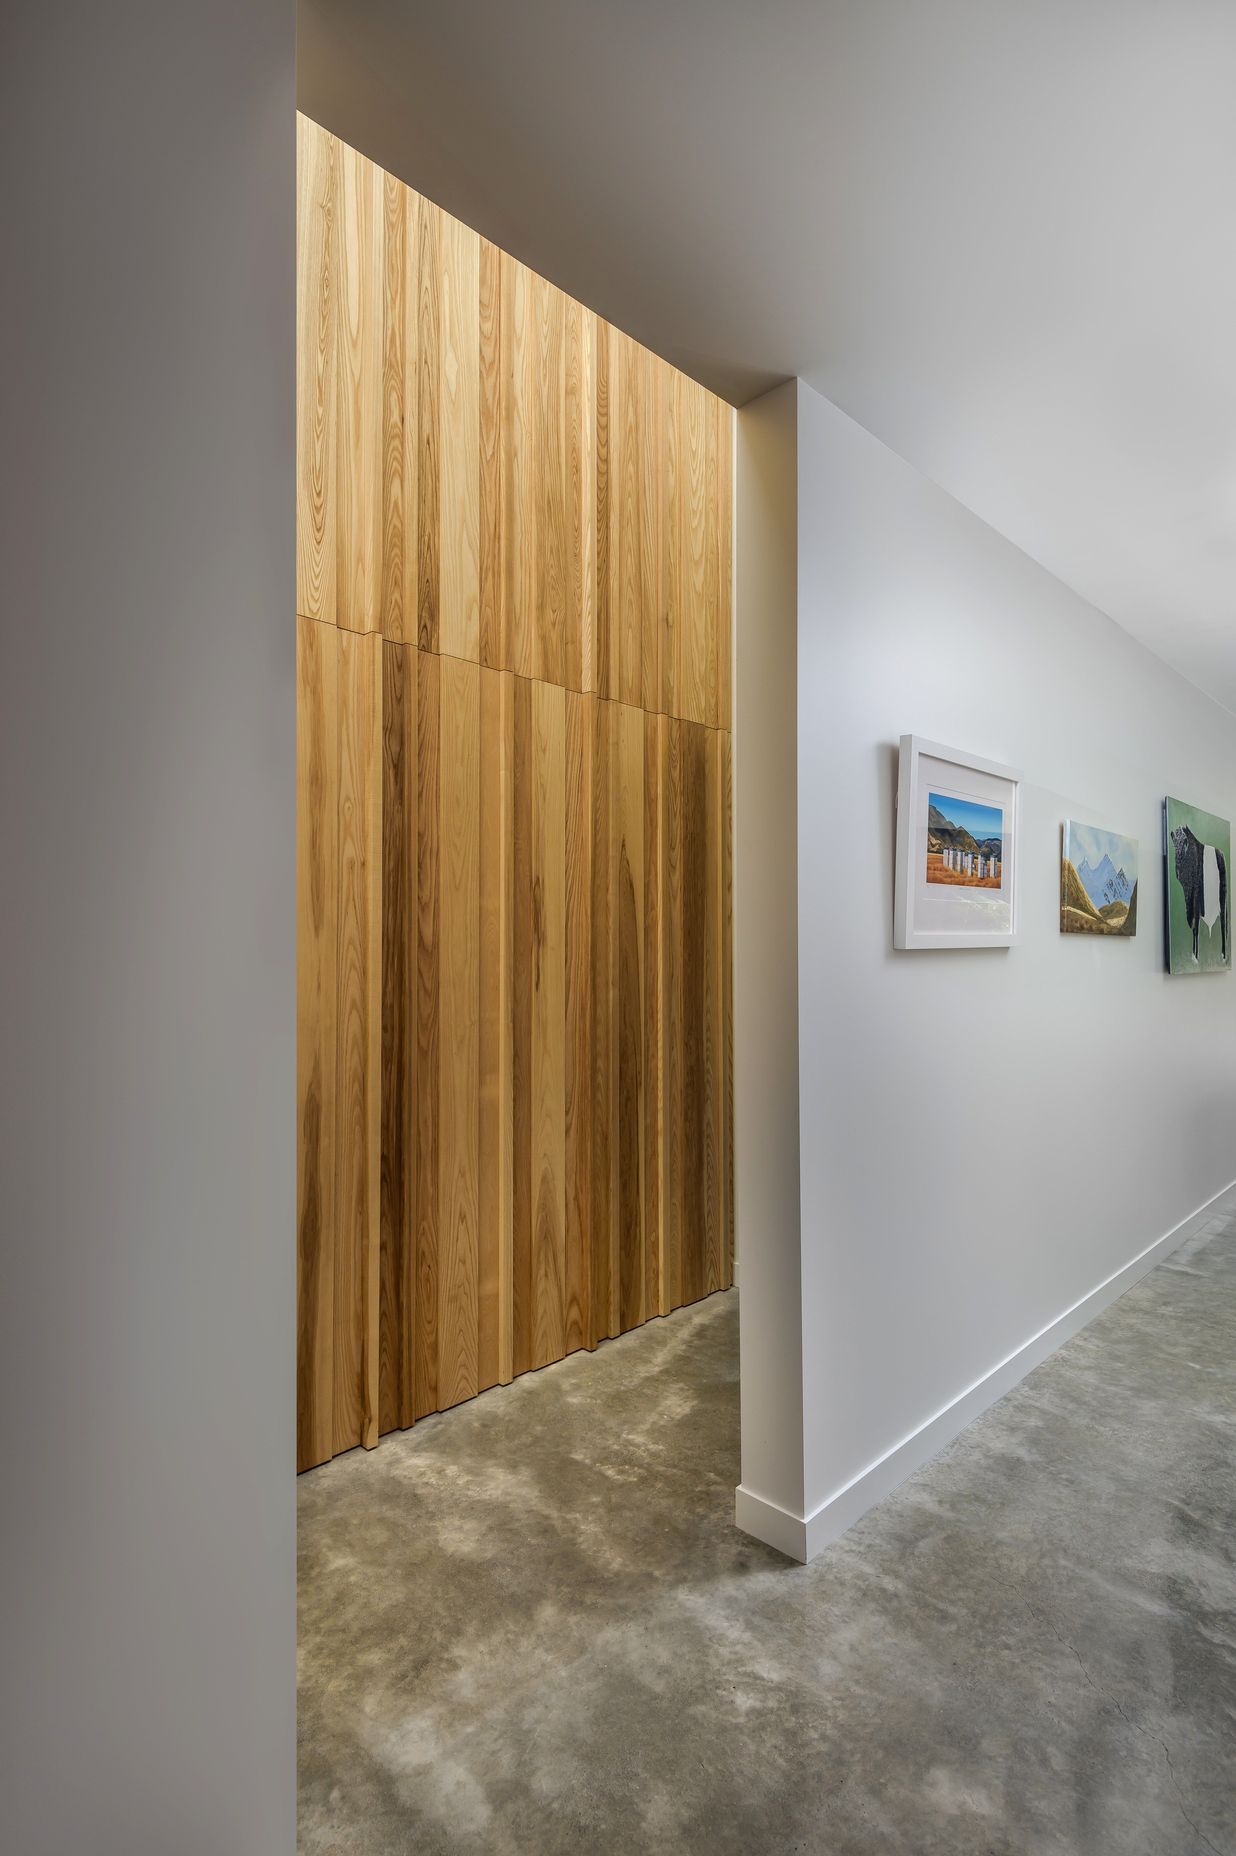 Randomly placed timber boards create a textural feature wall that conceals the entry to the bathroom off the hallway.